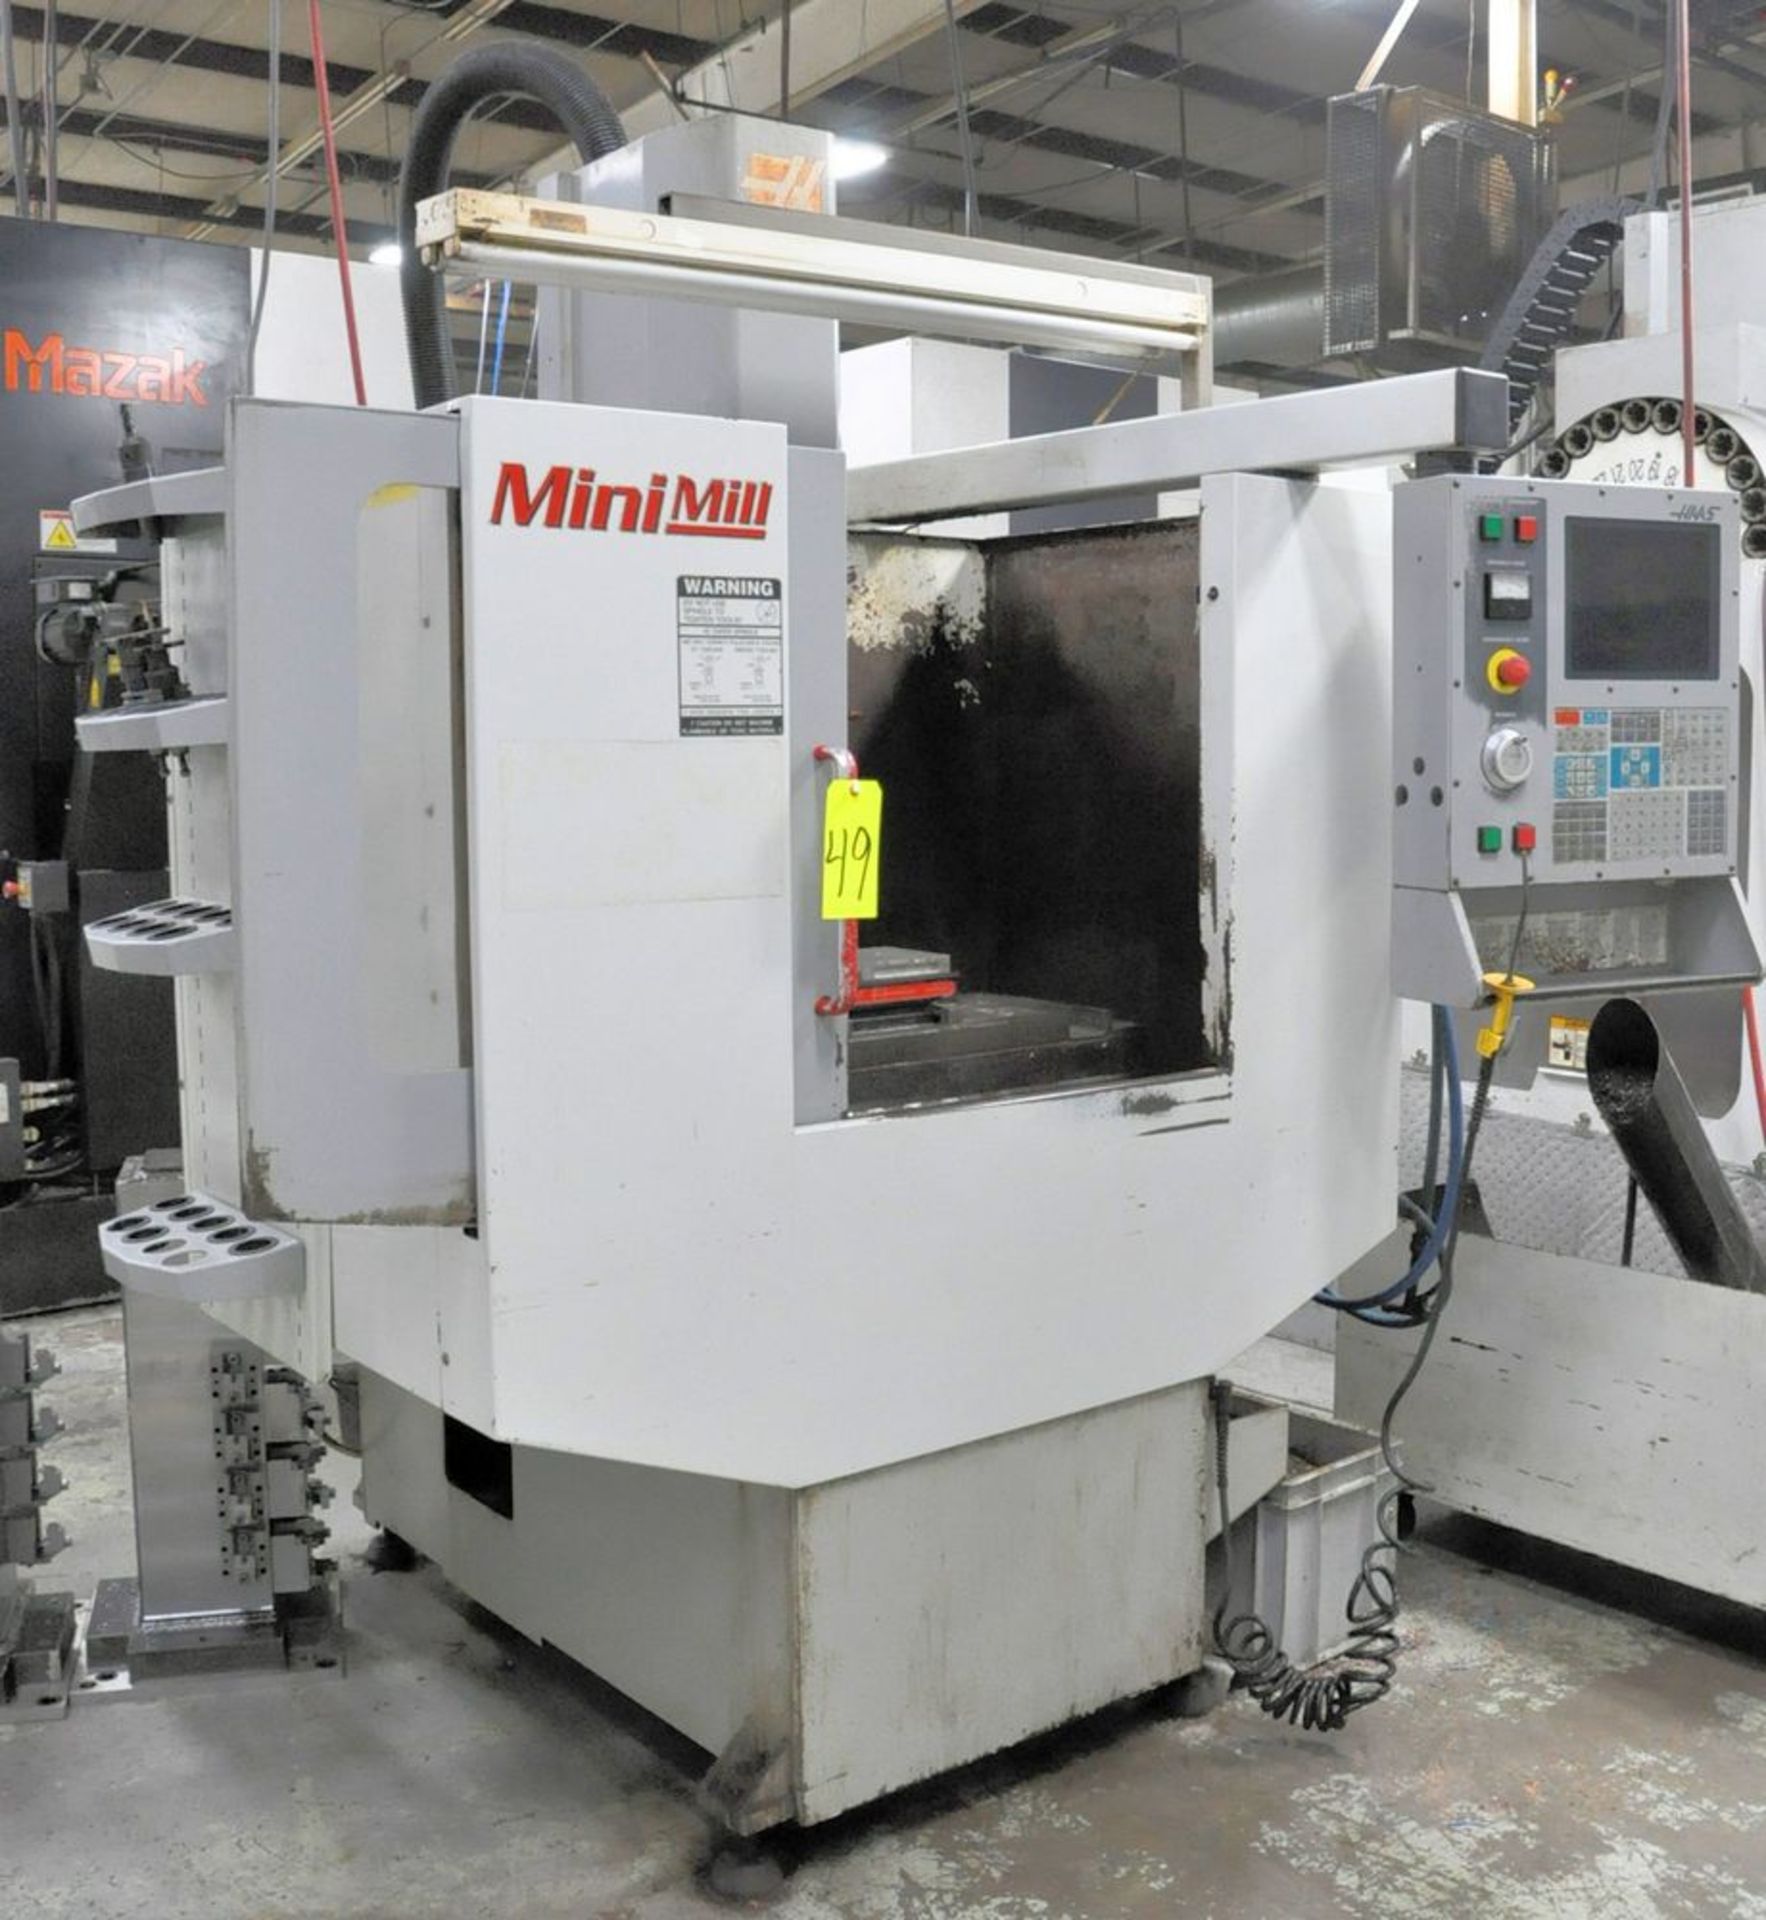 Haas Model Mini-Mill CNC Vertical Machining Center, S/n 26993 - Image 3 of 8